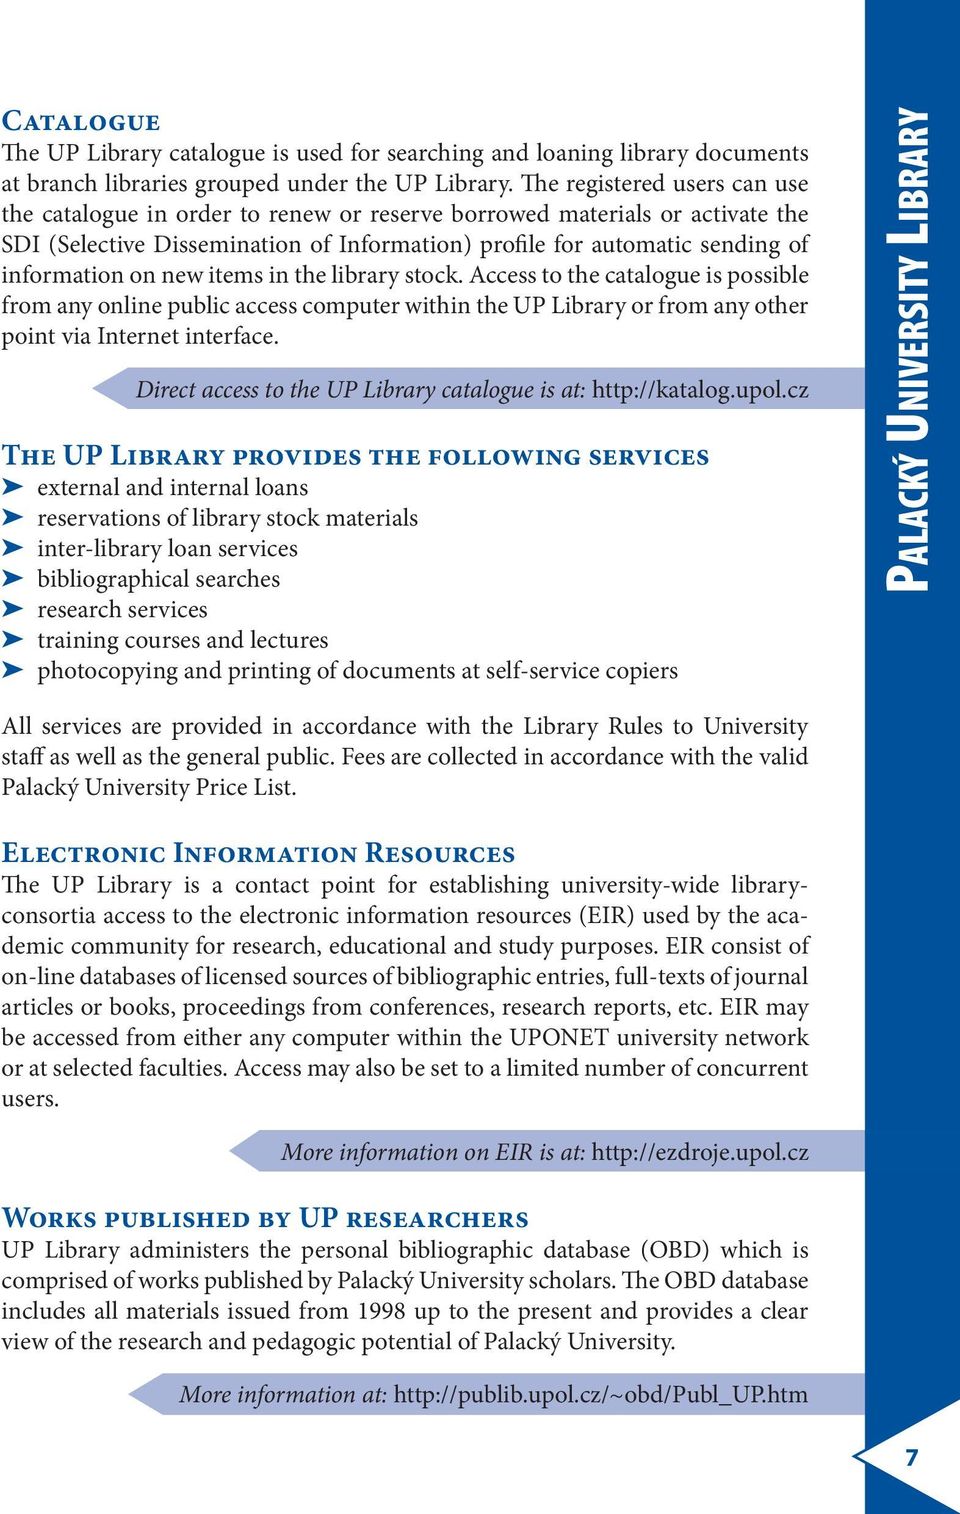 new items in the library stock. Access to the catalogue is possible from any online public access computer within the UP Library or from any other point via Internet interface.